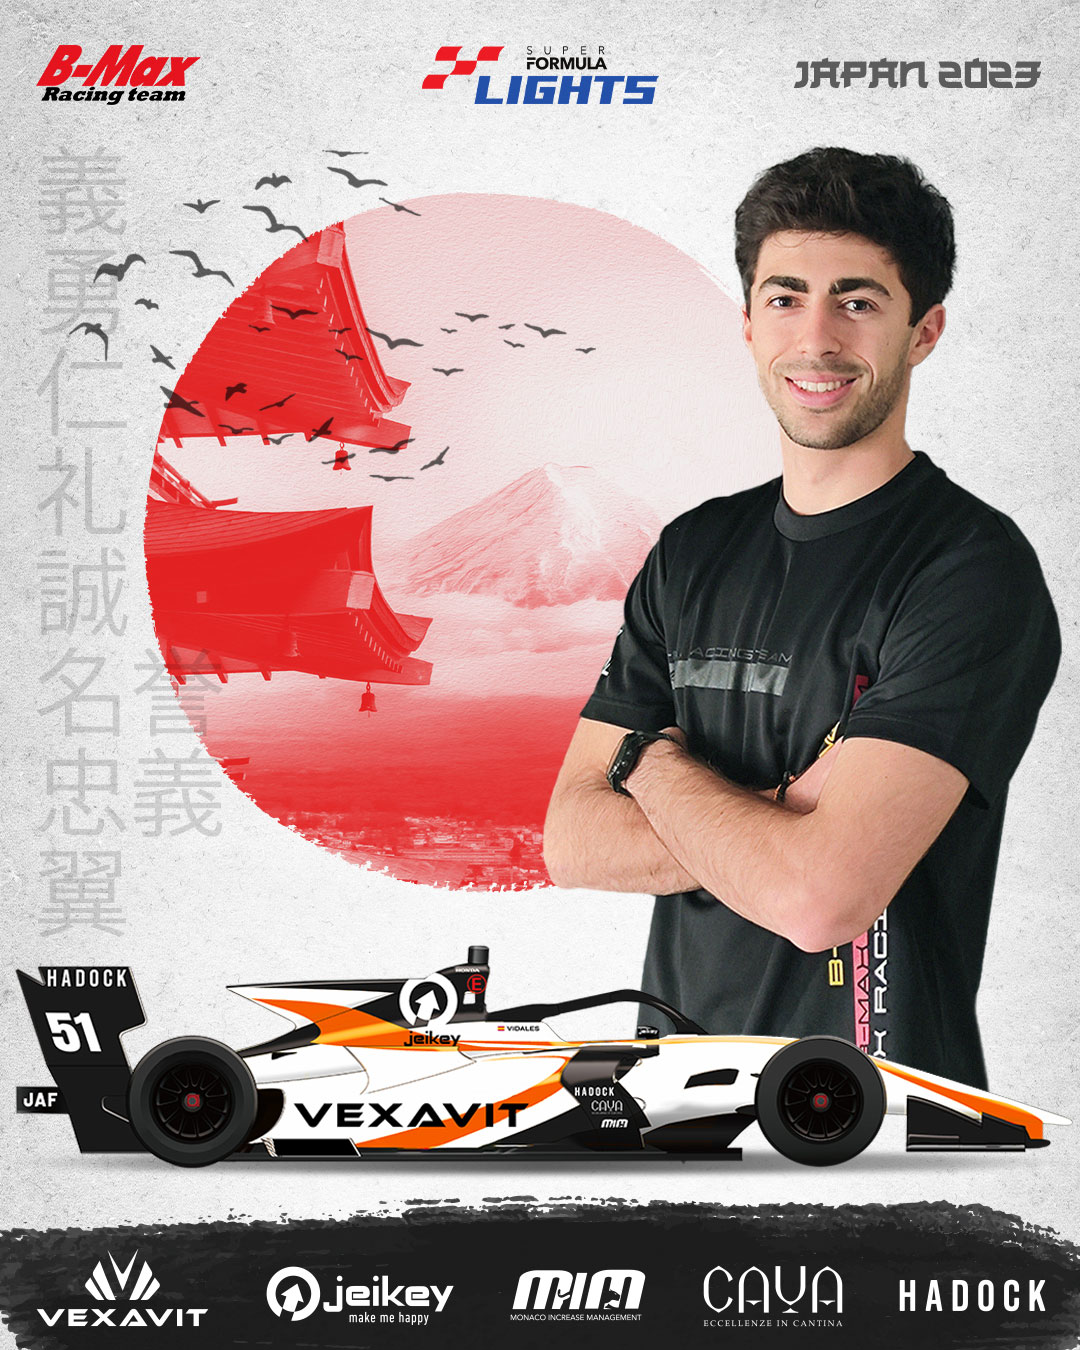 VIDALES TO RACE IN JAPANESE SUPER FORMULA LIGHTS WITH TEAM BMAX